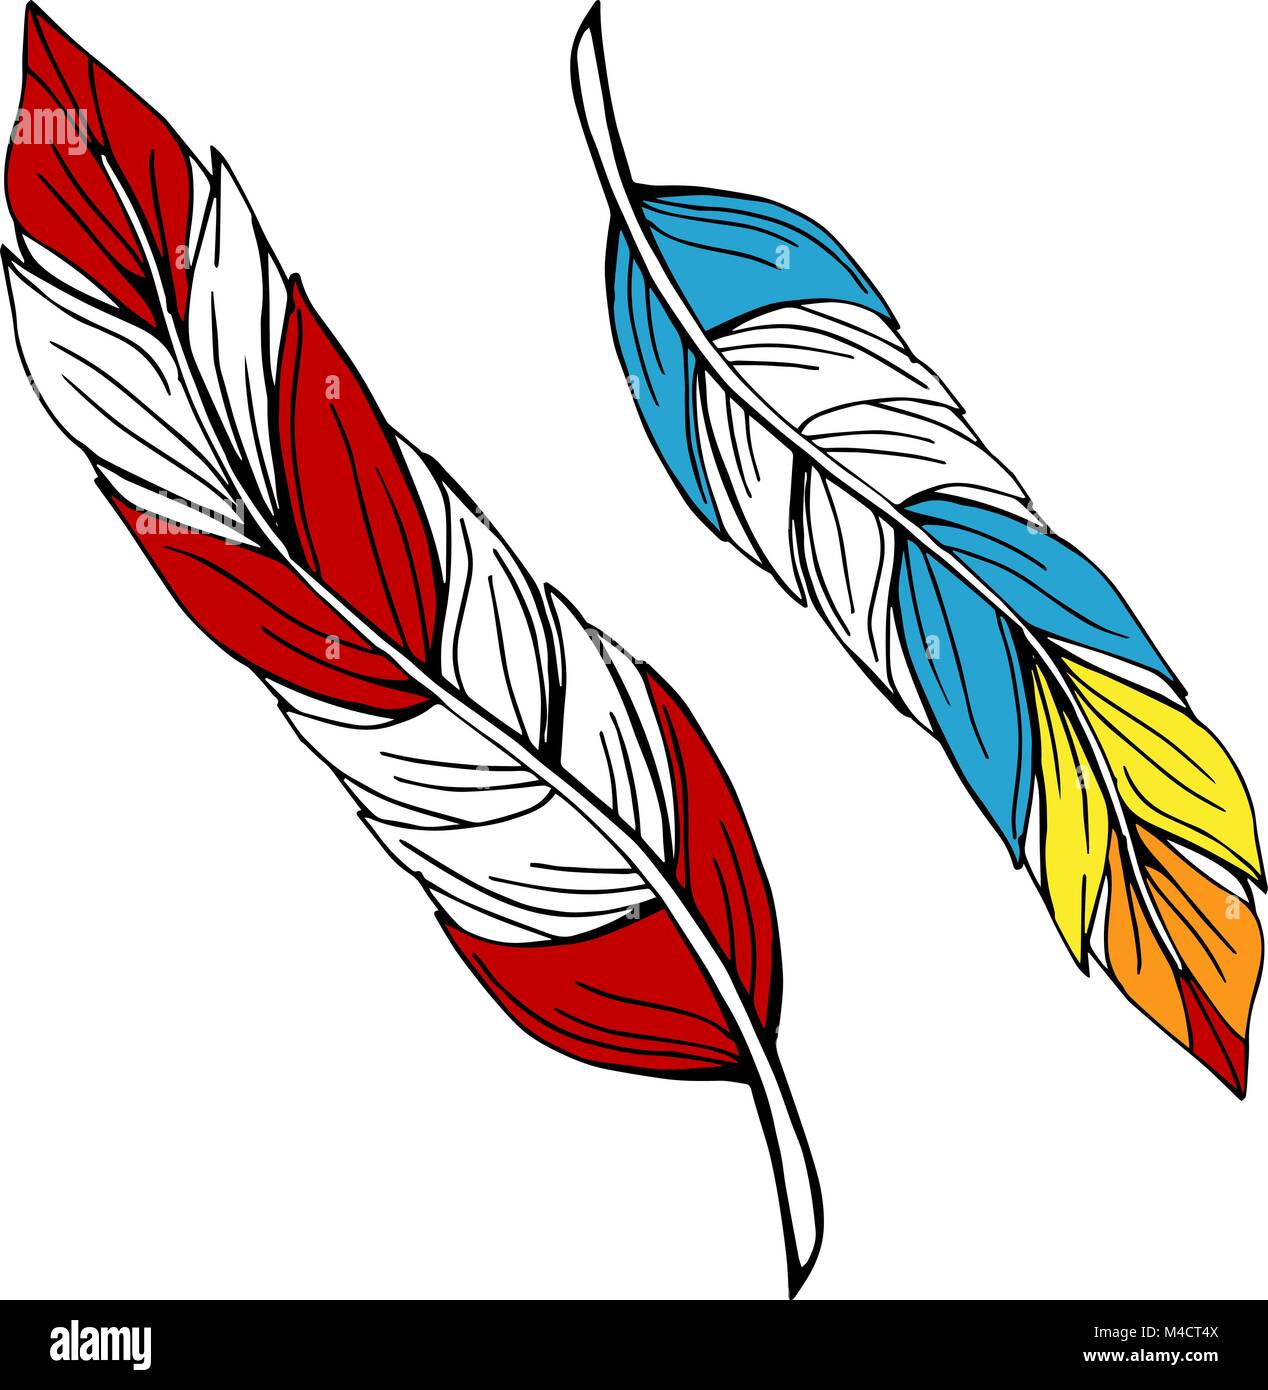 An image of two colorful feathers. Stock Vector